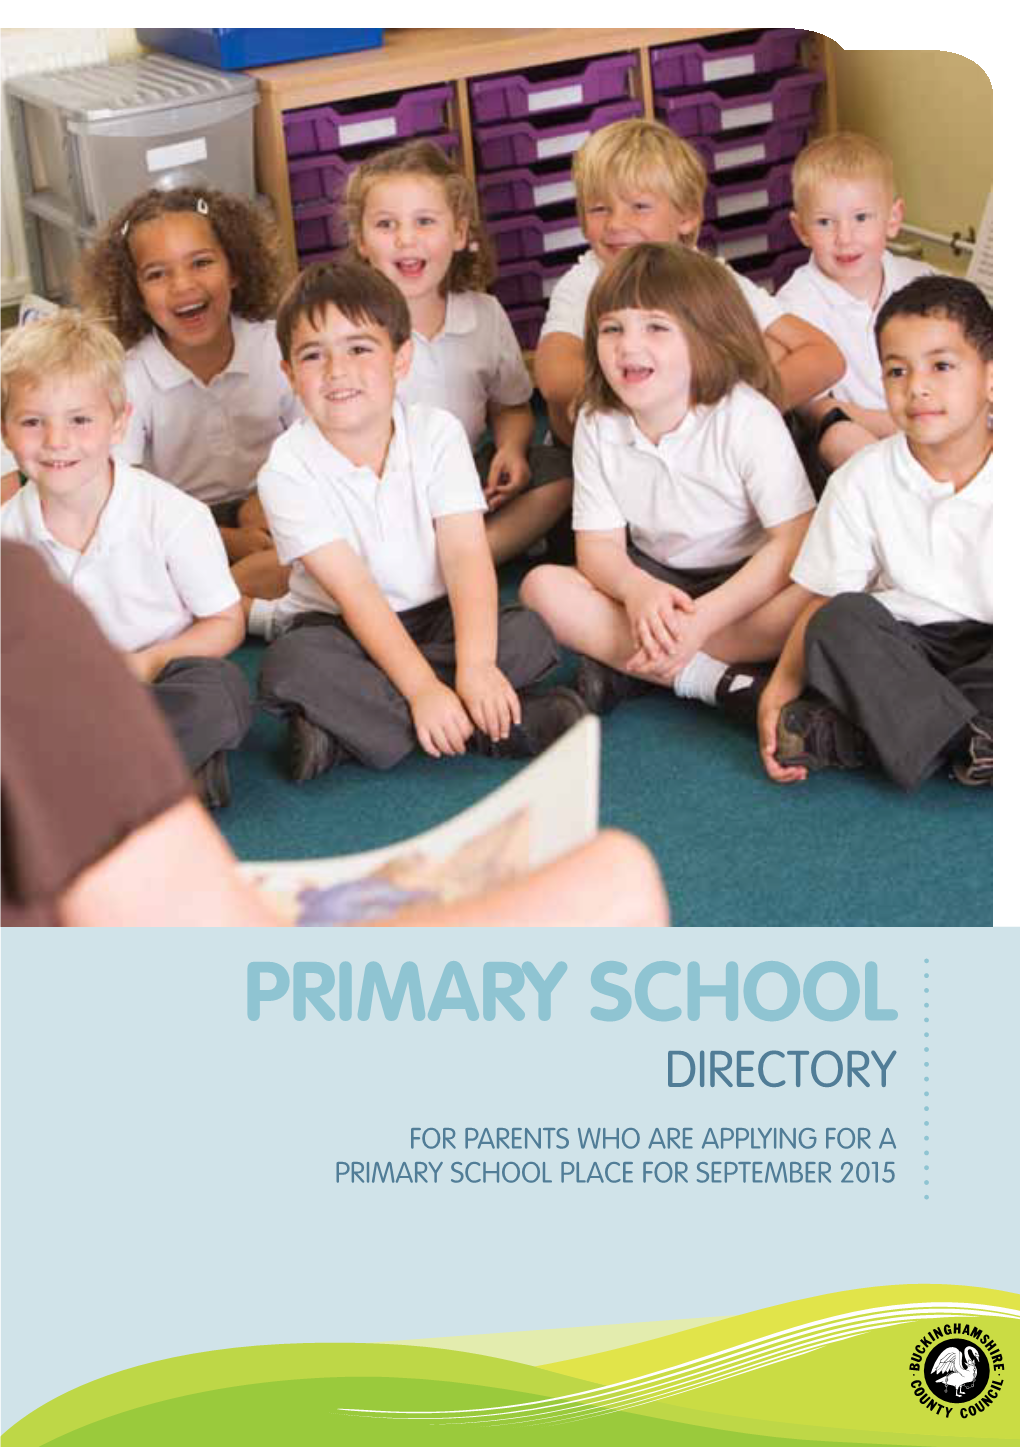 PRIMARY SCHOOL DIRECTORY for Parents Who Are Applying for a PRIMARY SCHOOL Place for September 2015